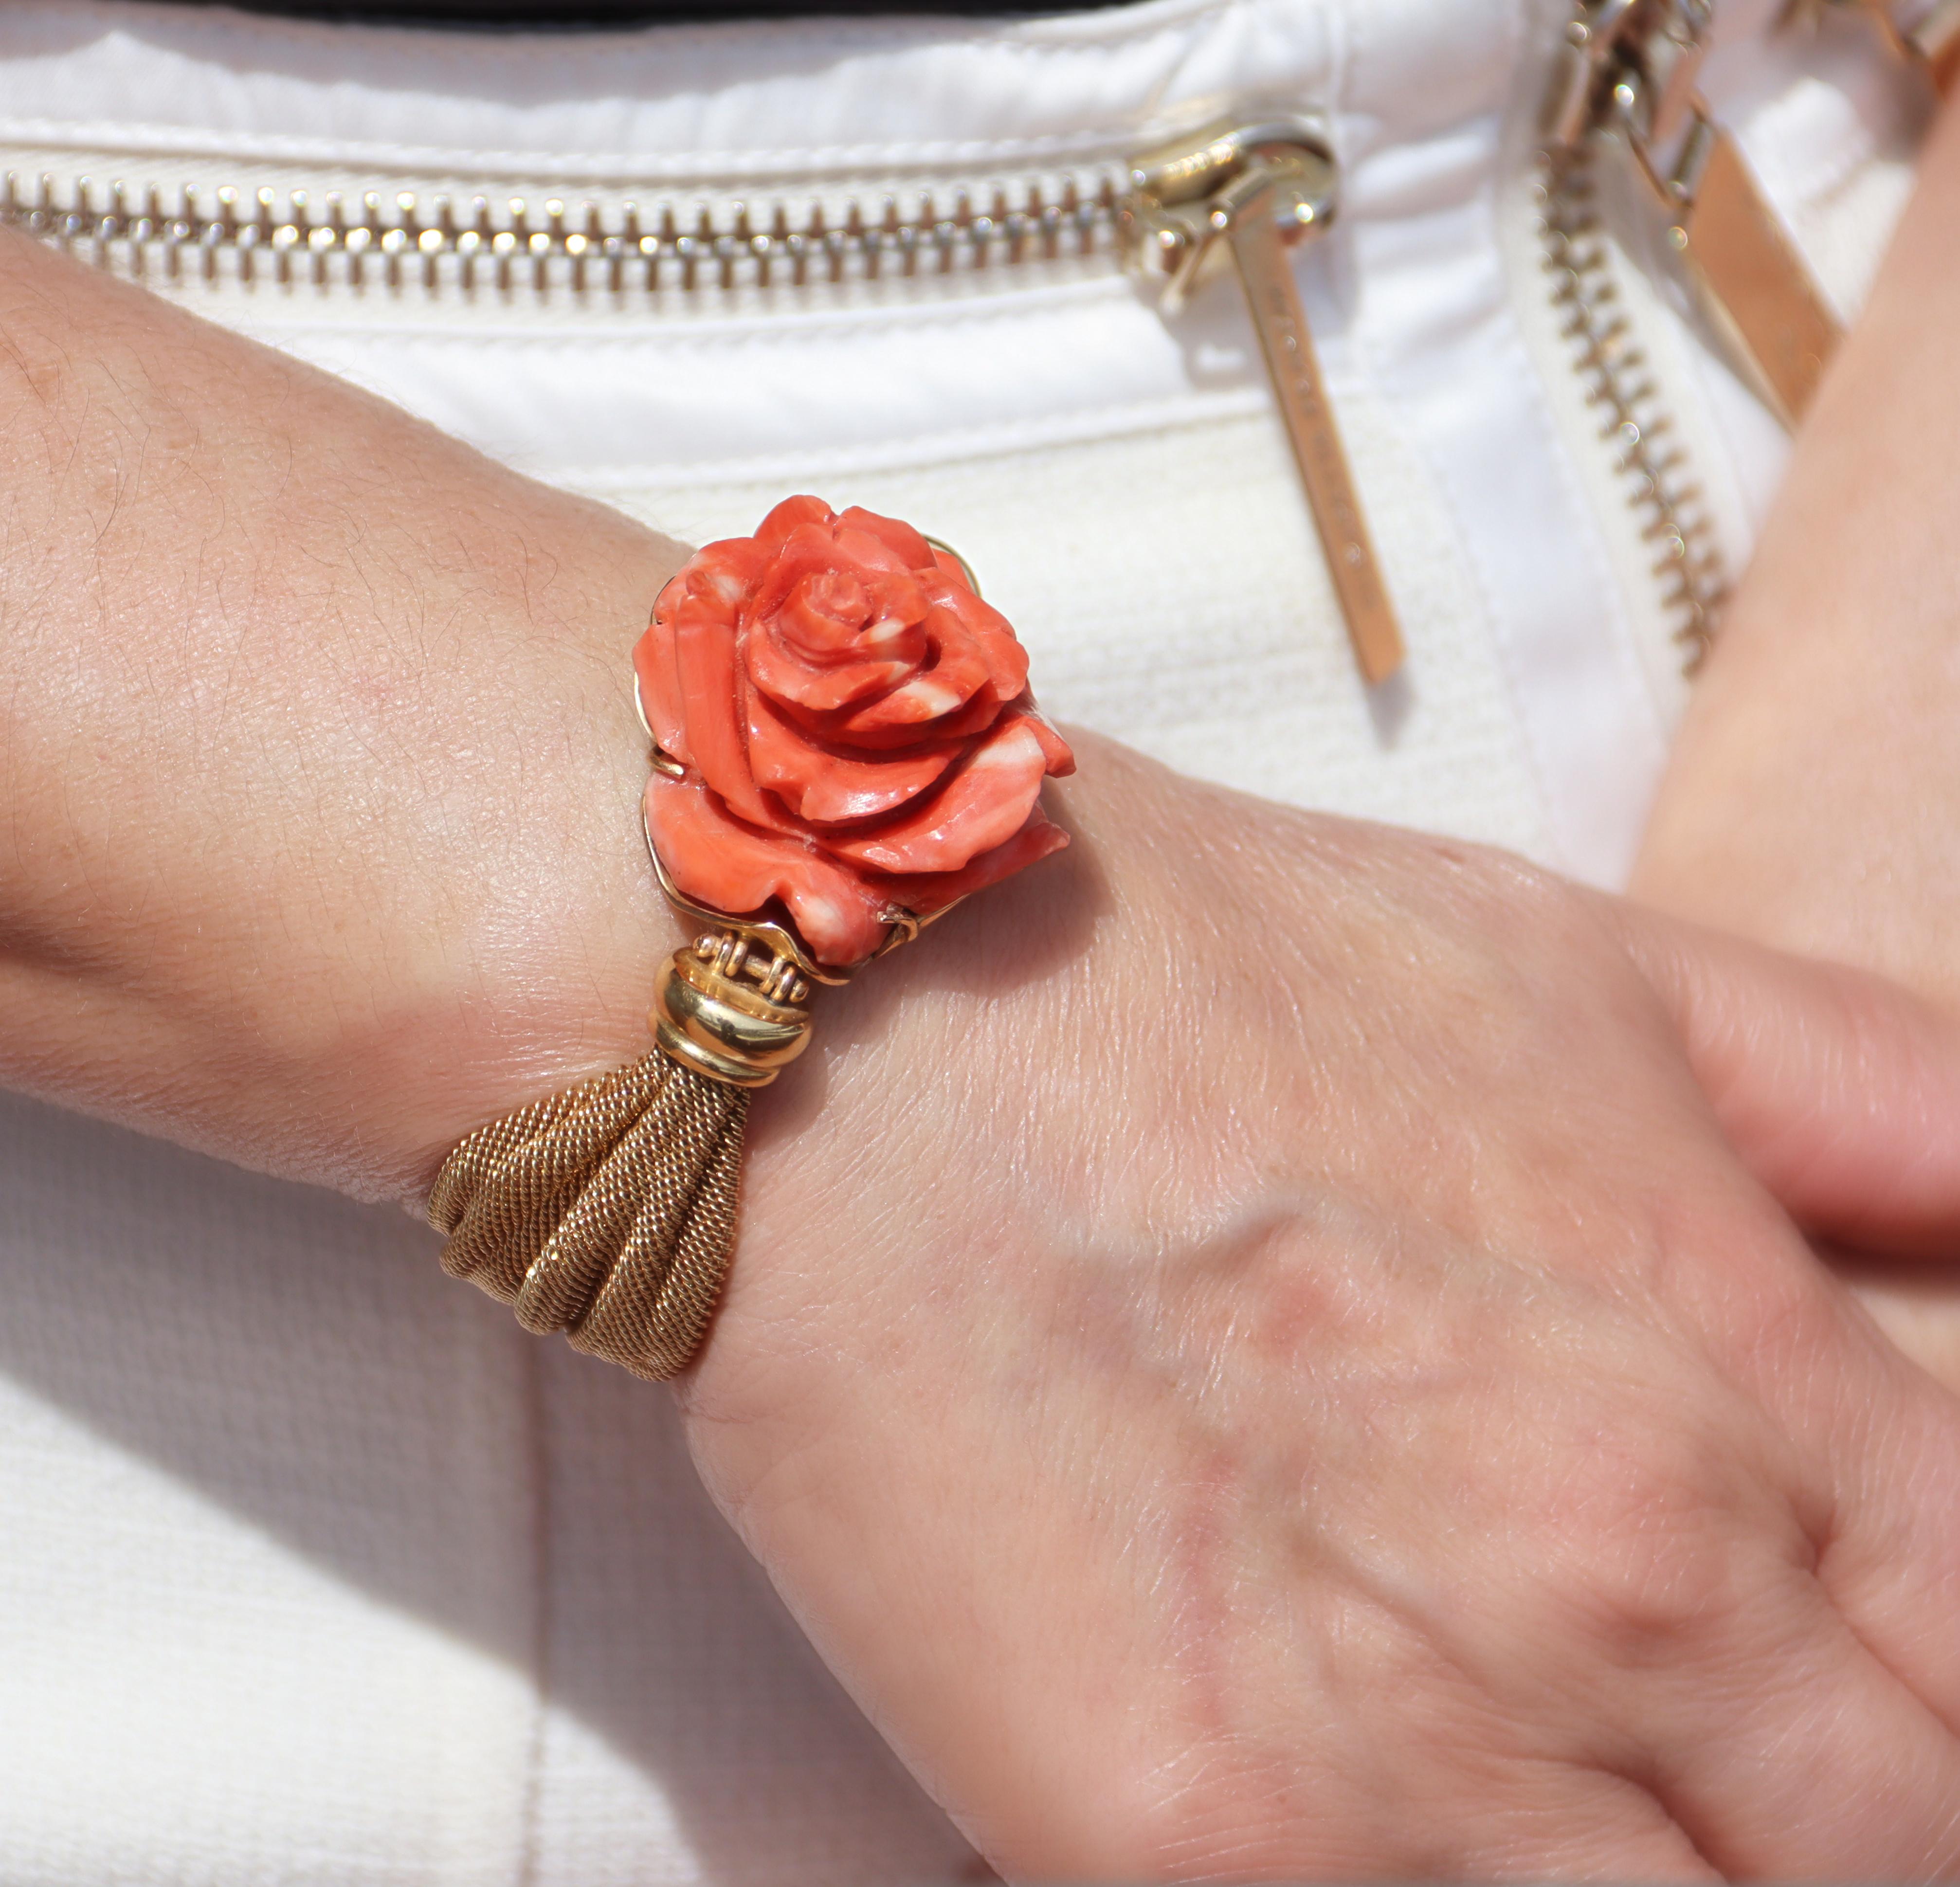 Capturing the essence of romantic elegance, this bracelet showcases a delicate 14-karat yellow gold mesh design, gracefully leading to its centerpiece, a meticulously sculpted natural coral rose. The rose, with its petals unfurled in full bloom, is